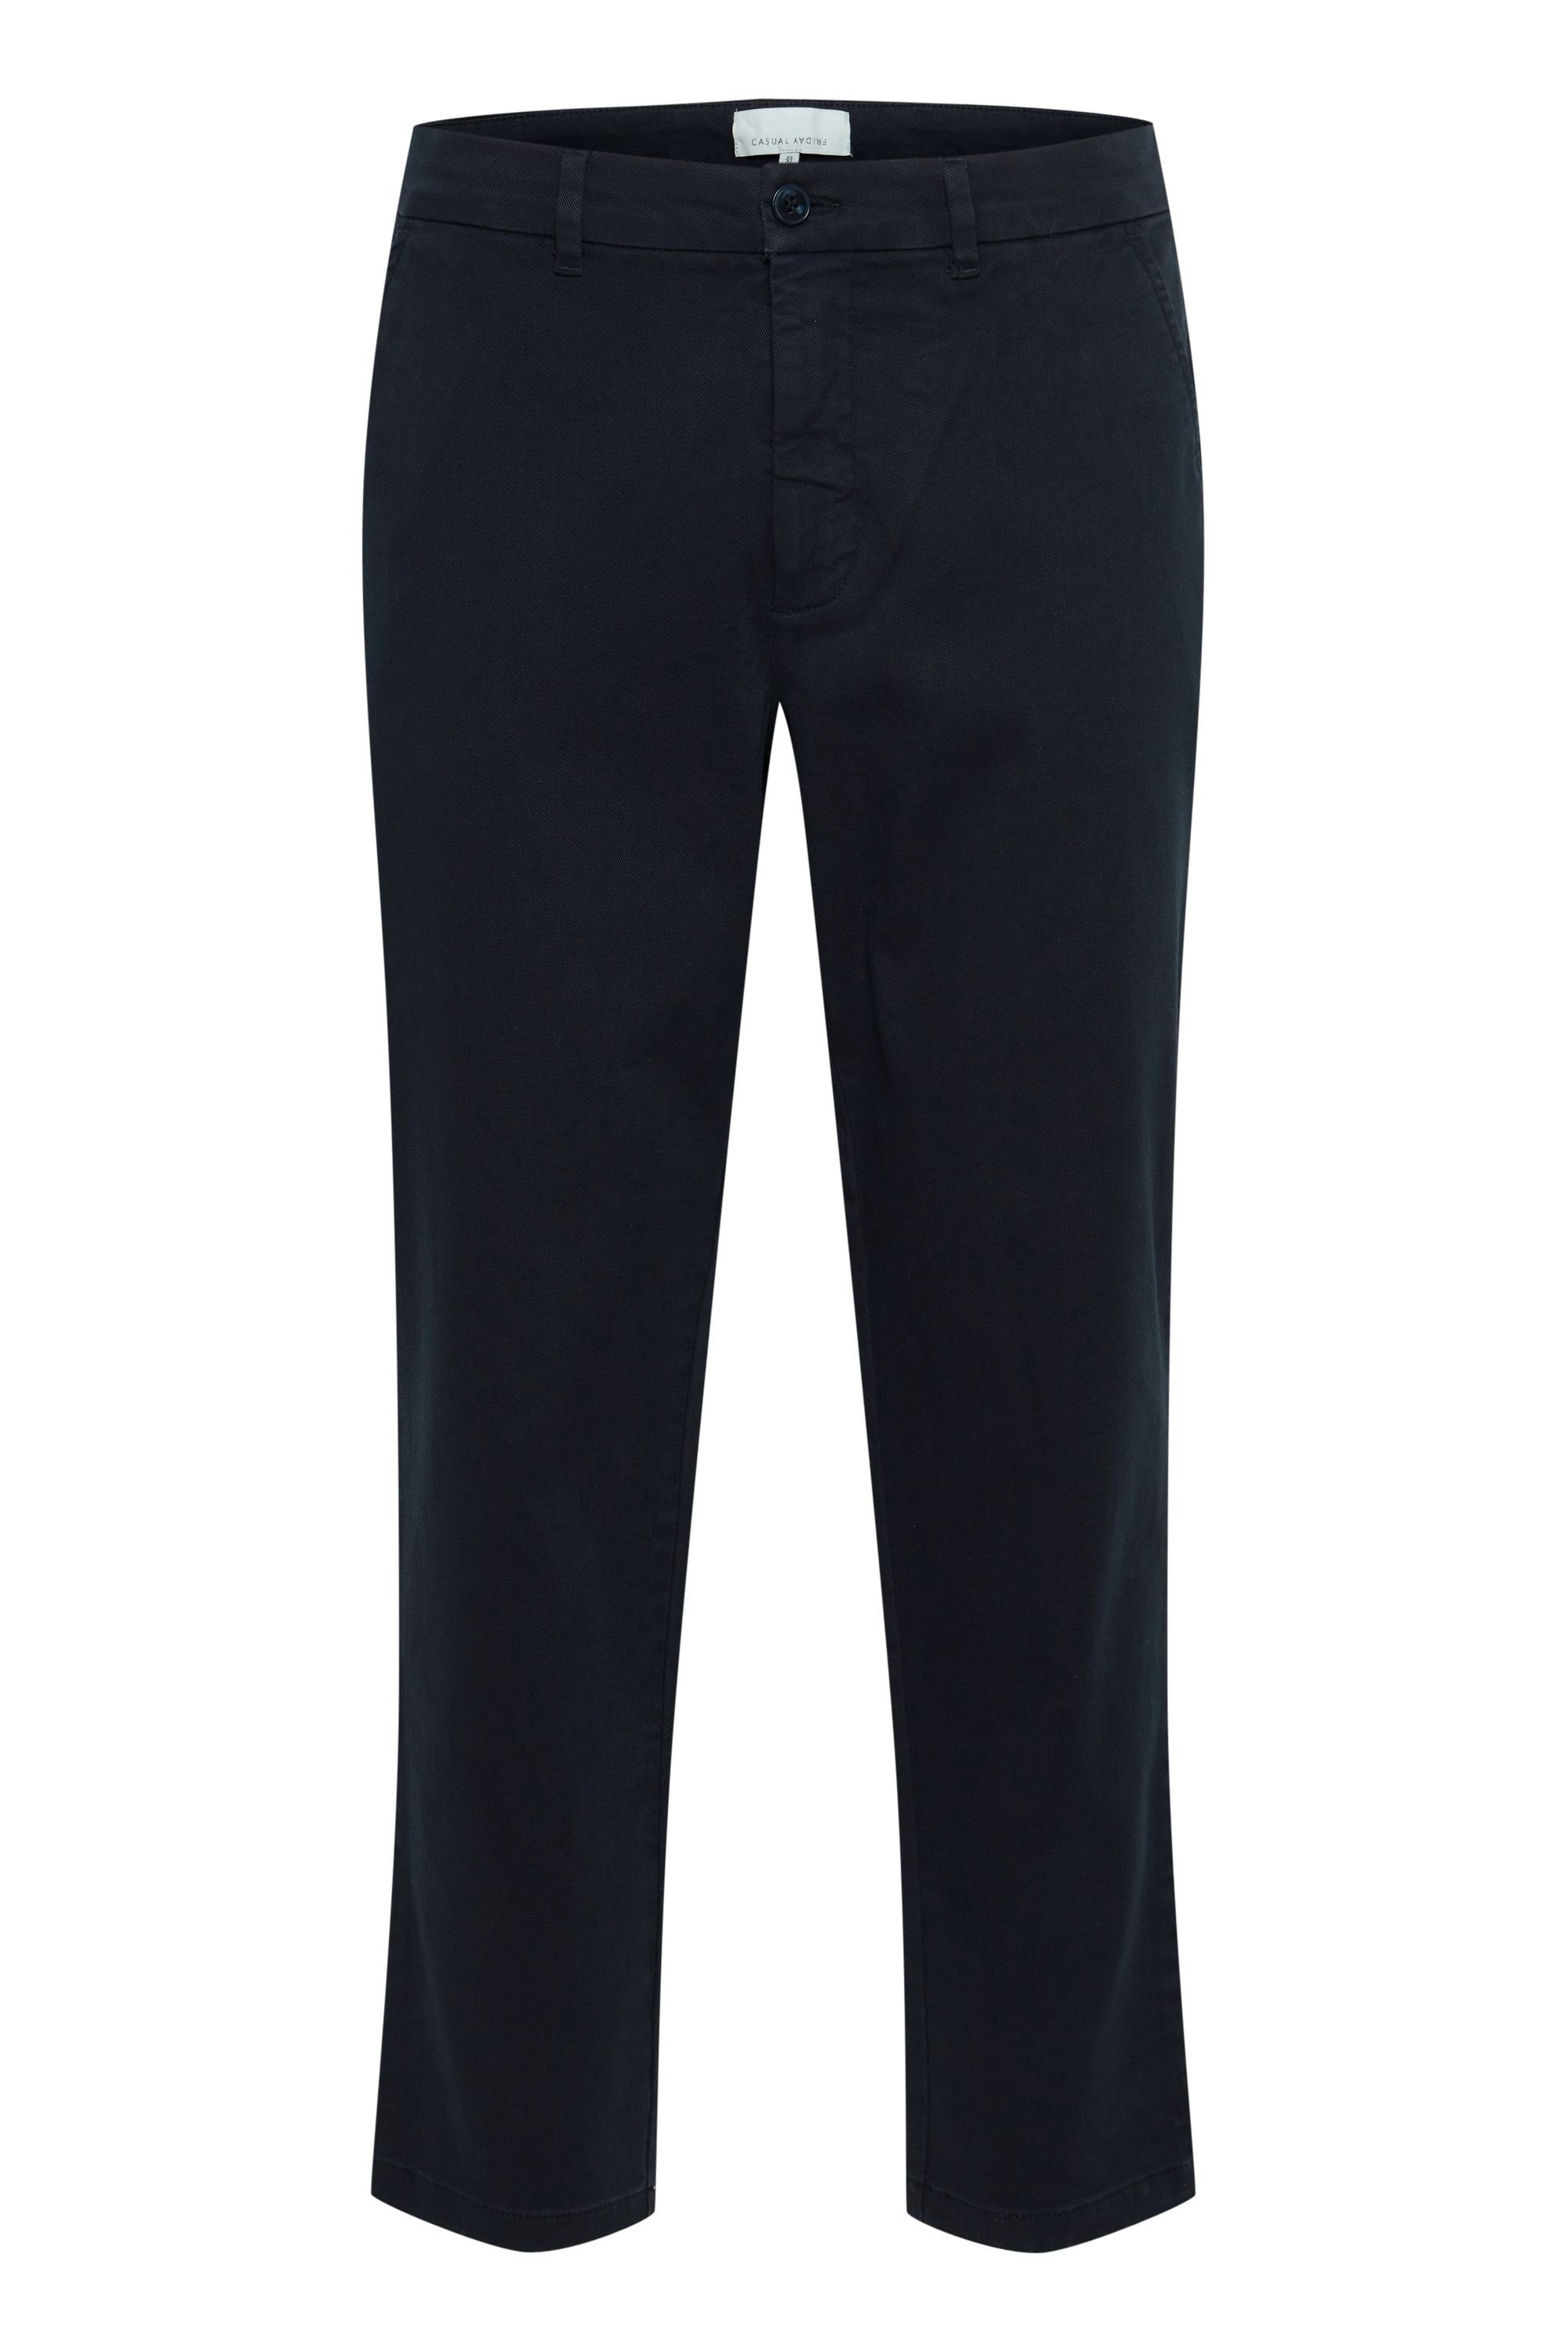 Pepe Casual Friday Sweatjeans relaxed 20504412 pants